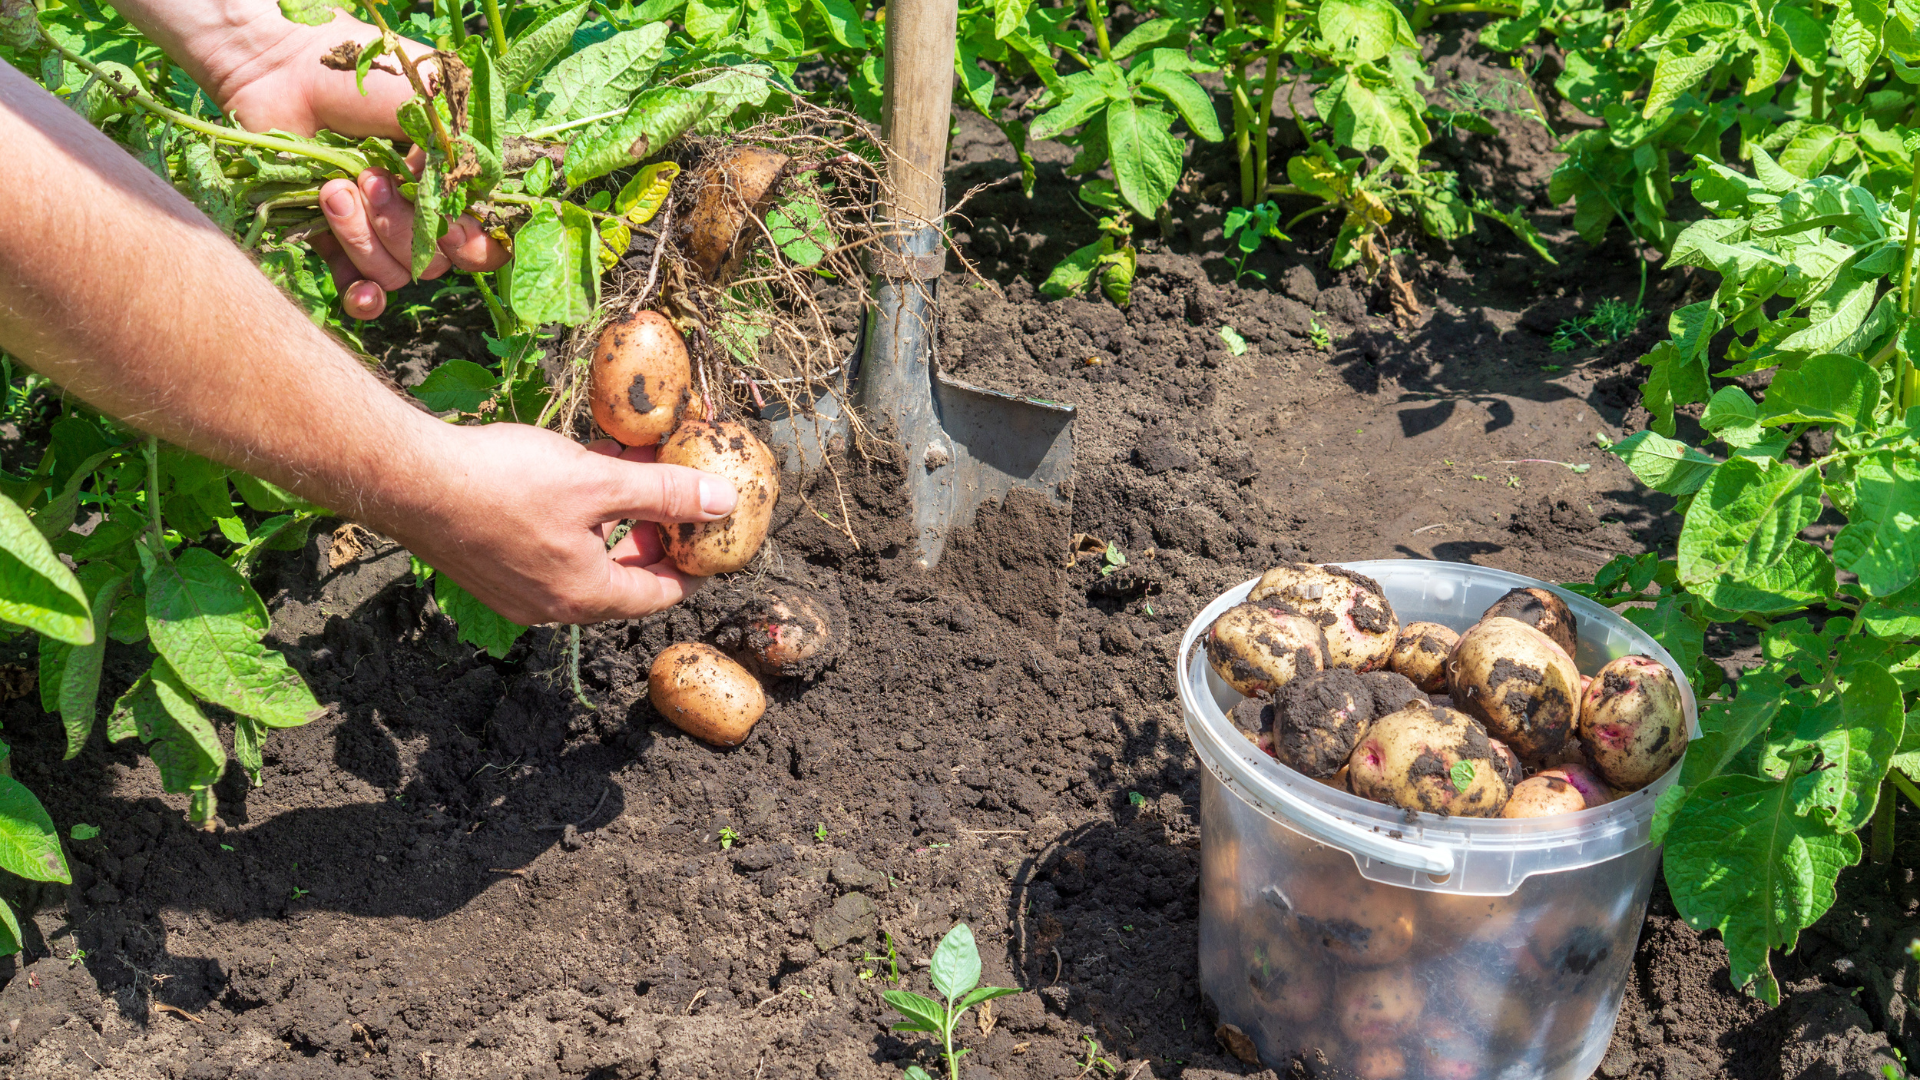 To store potatoes, you have to take them out of the ground. You can remove the tops and let them si...